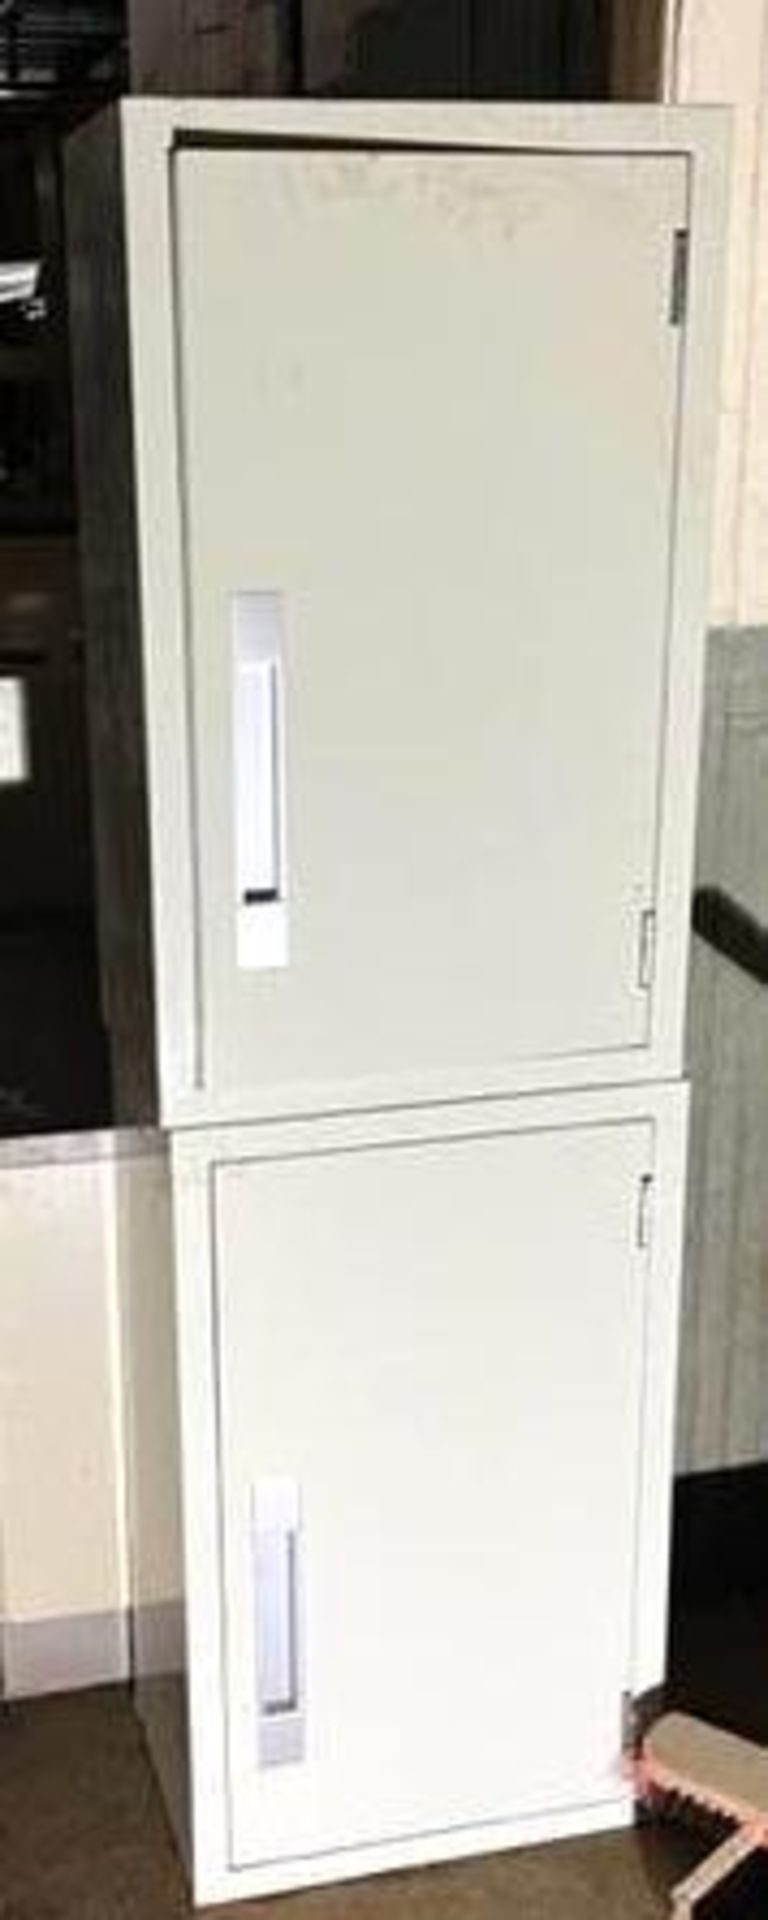 Lot of (2) Metal Cabinets